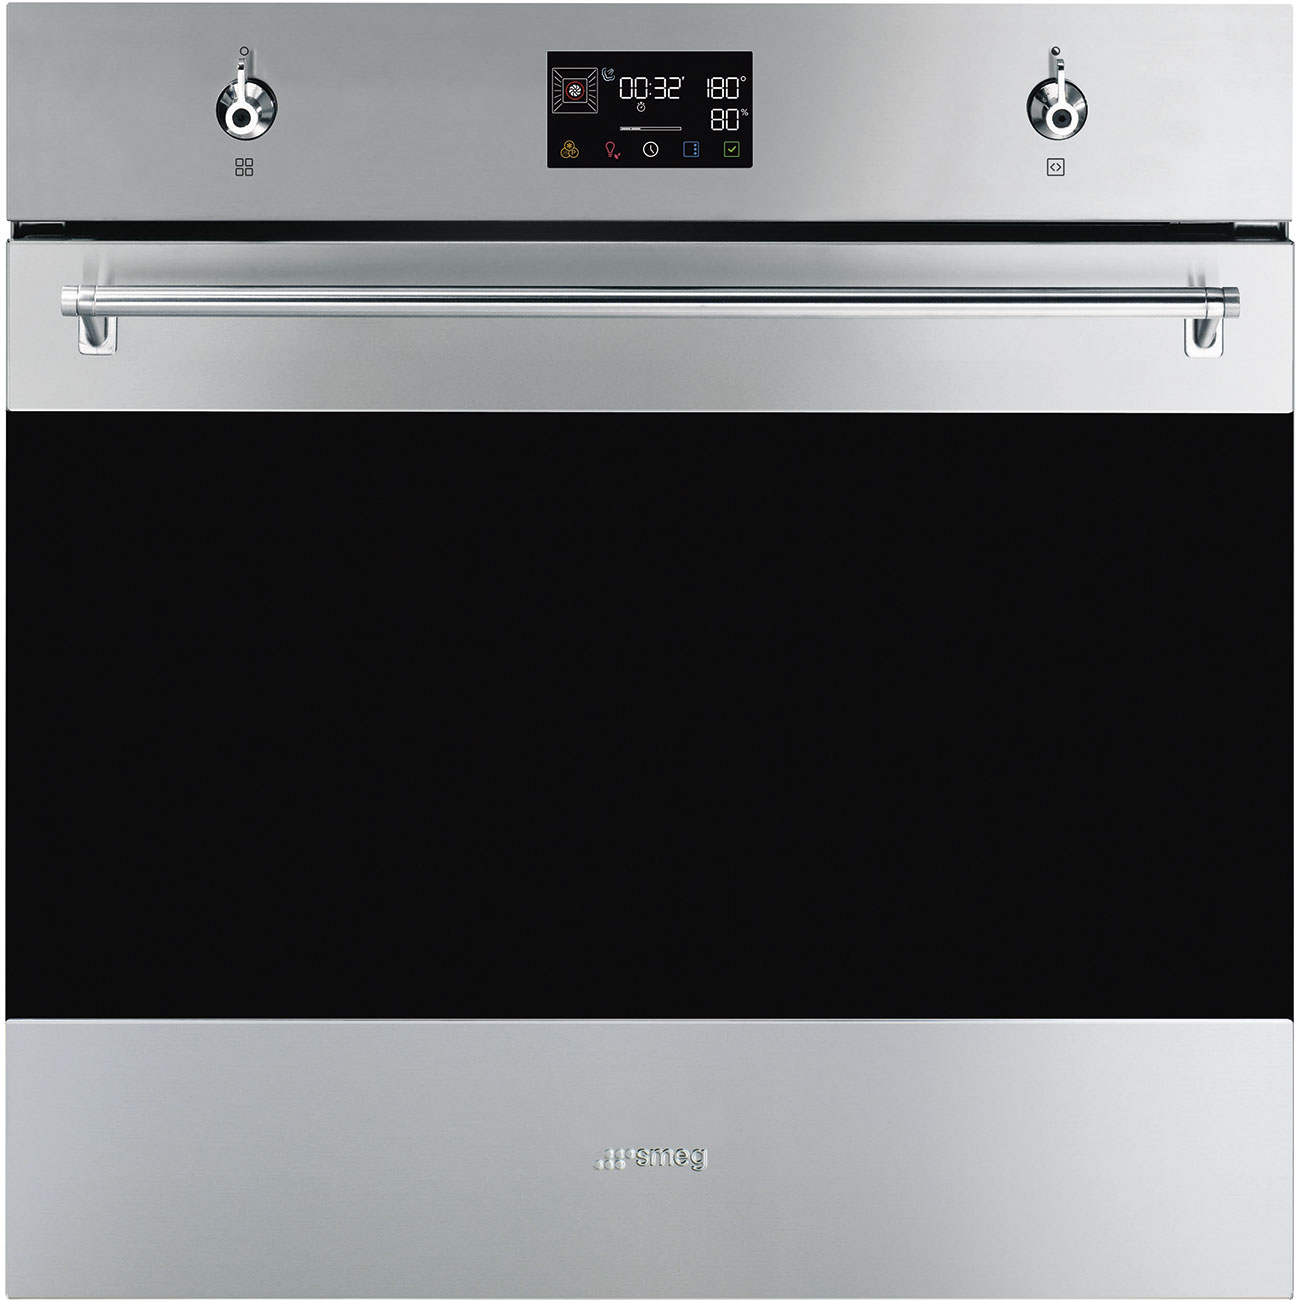 Stainless steel SteamOne Galileo Oven.  60cm. Built-in. Smeg_1